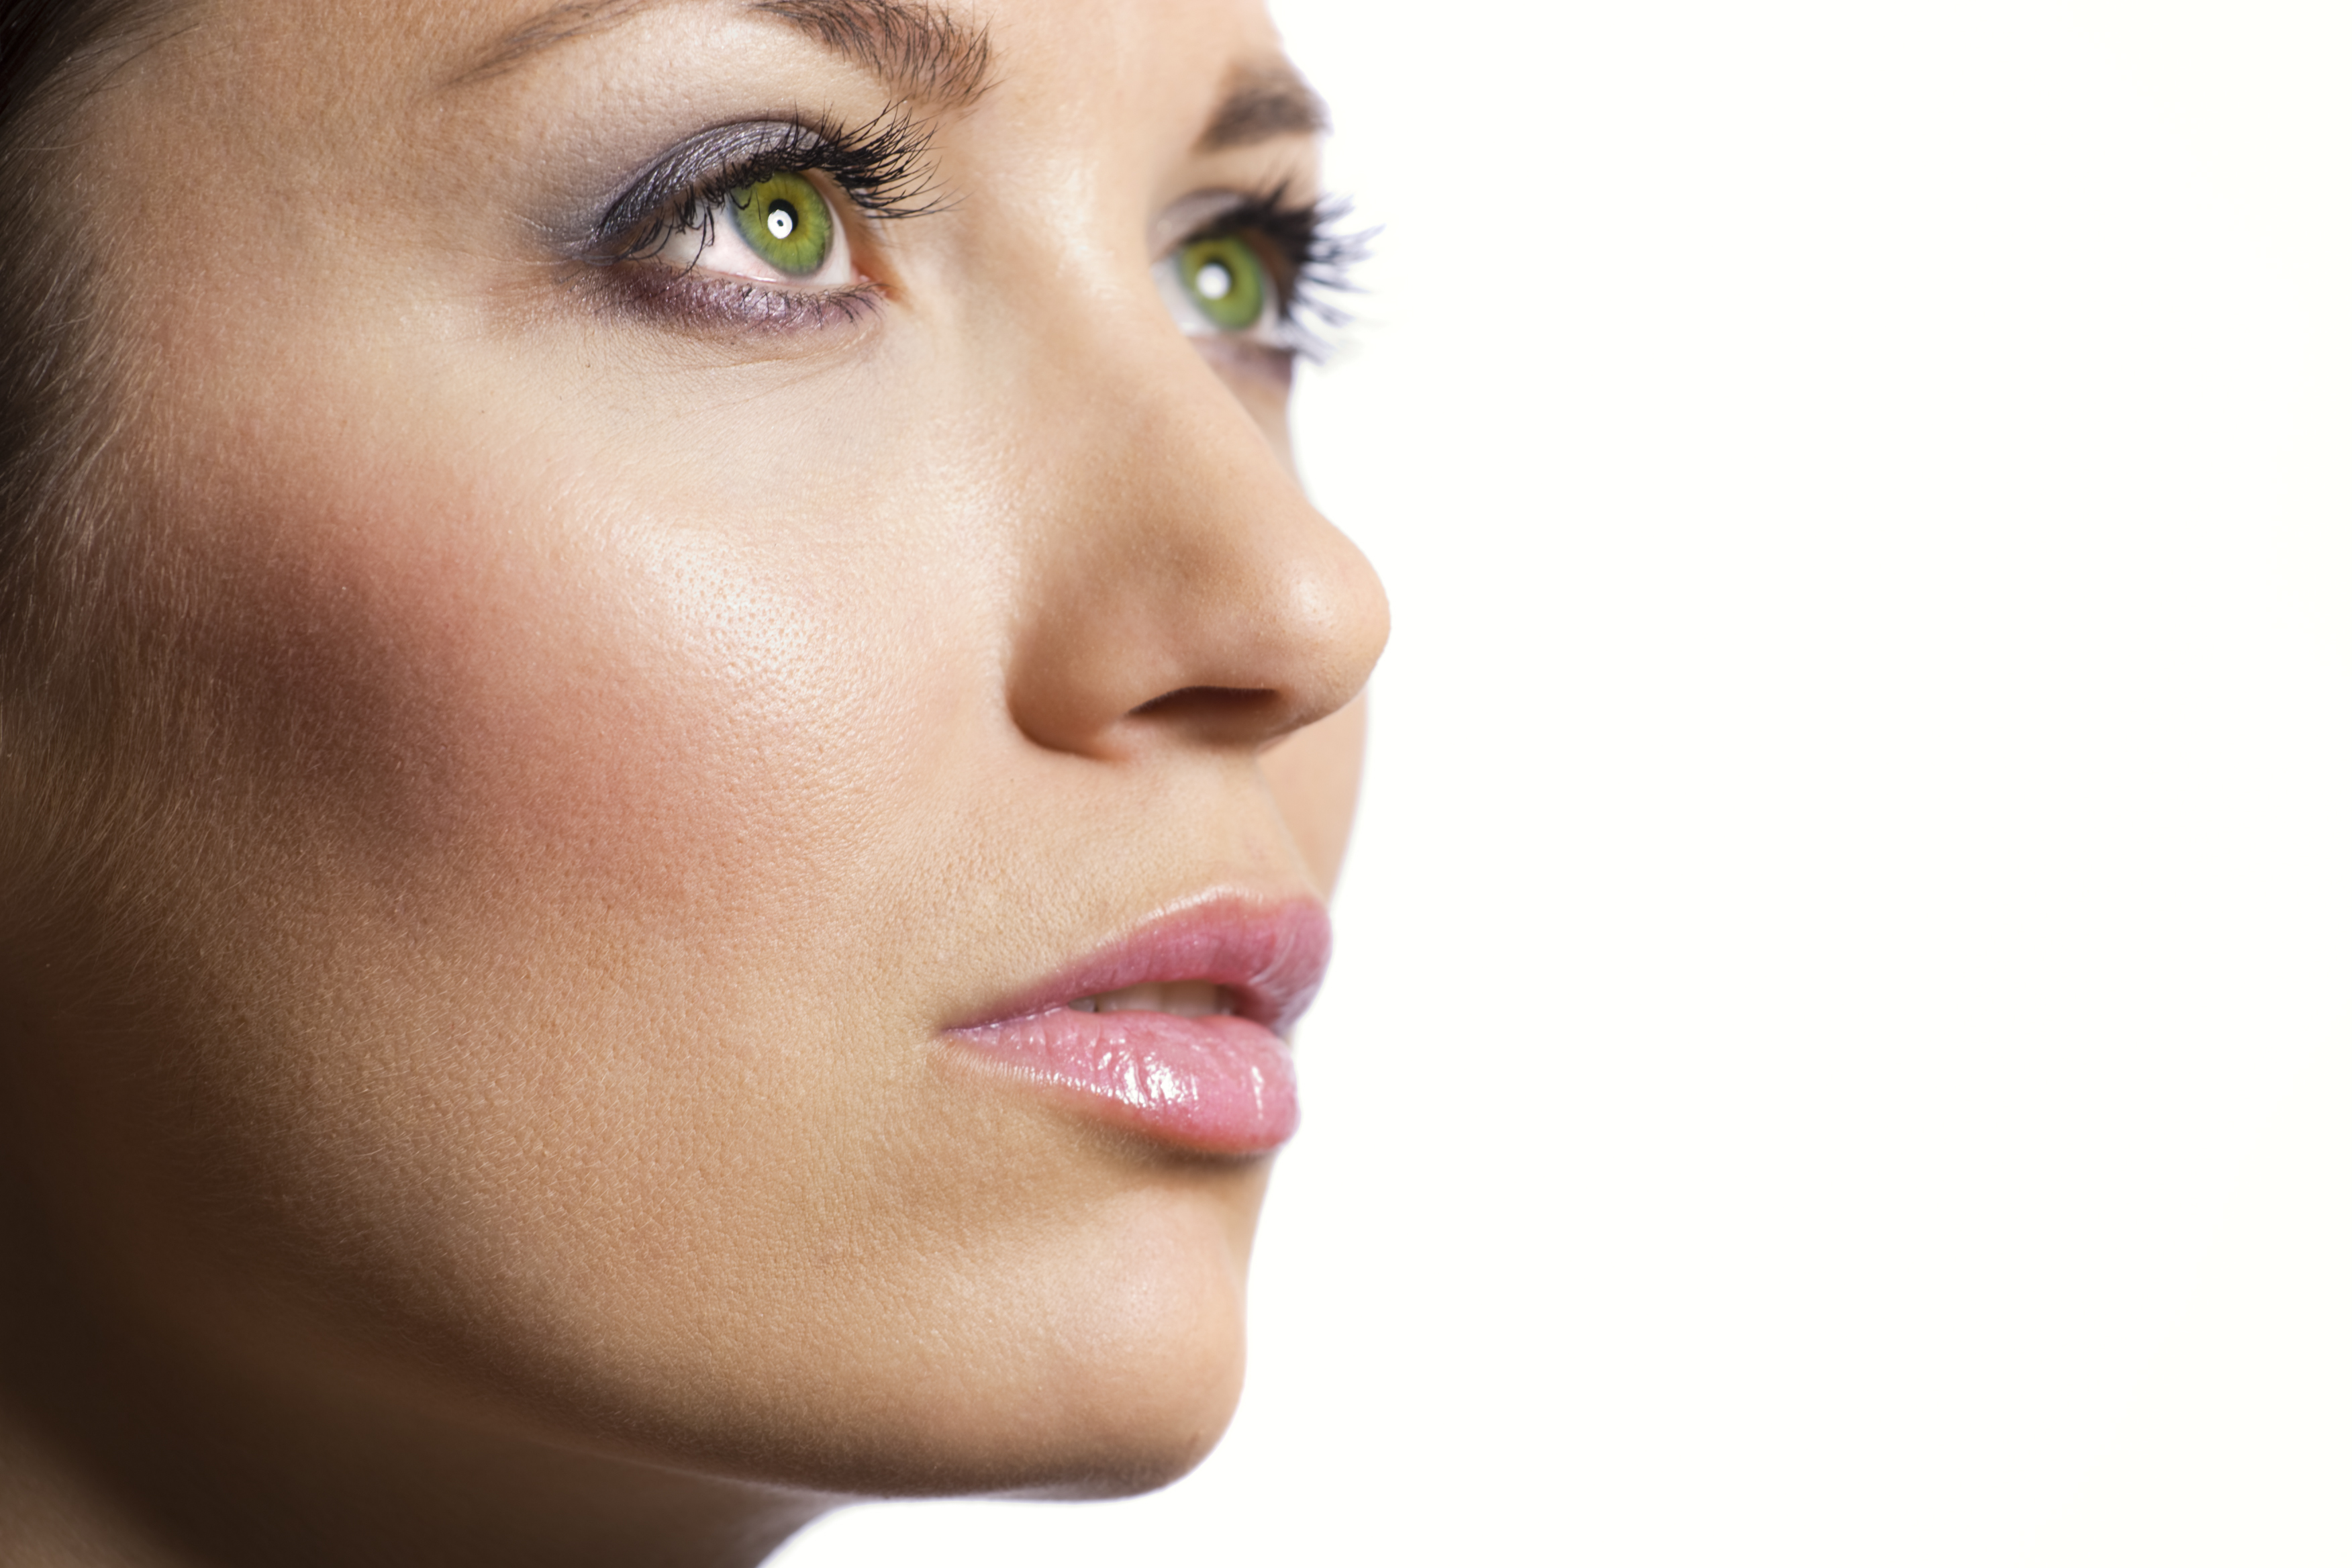 Cheek Augmentation (Implants, Fillers, Fat) Cost, Recovery